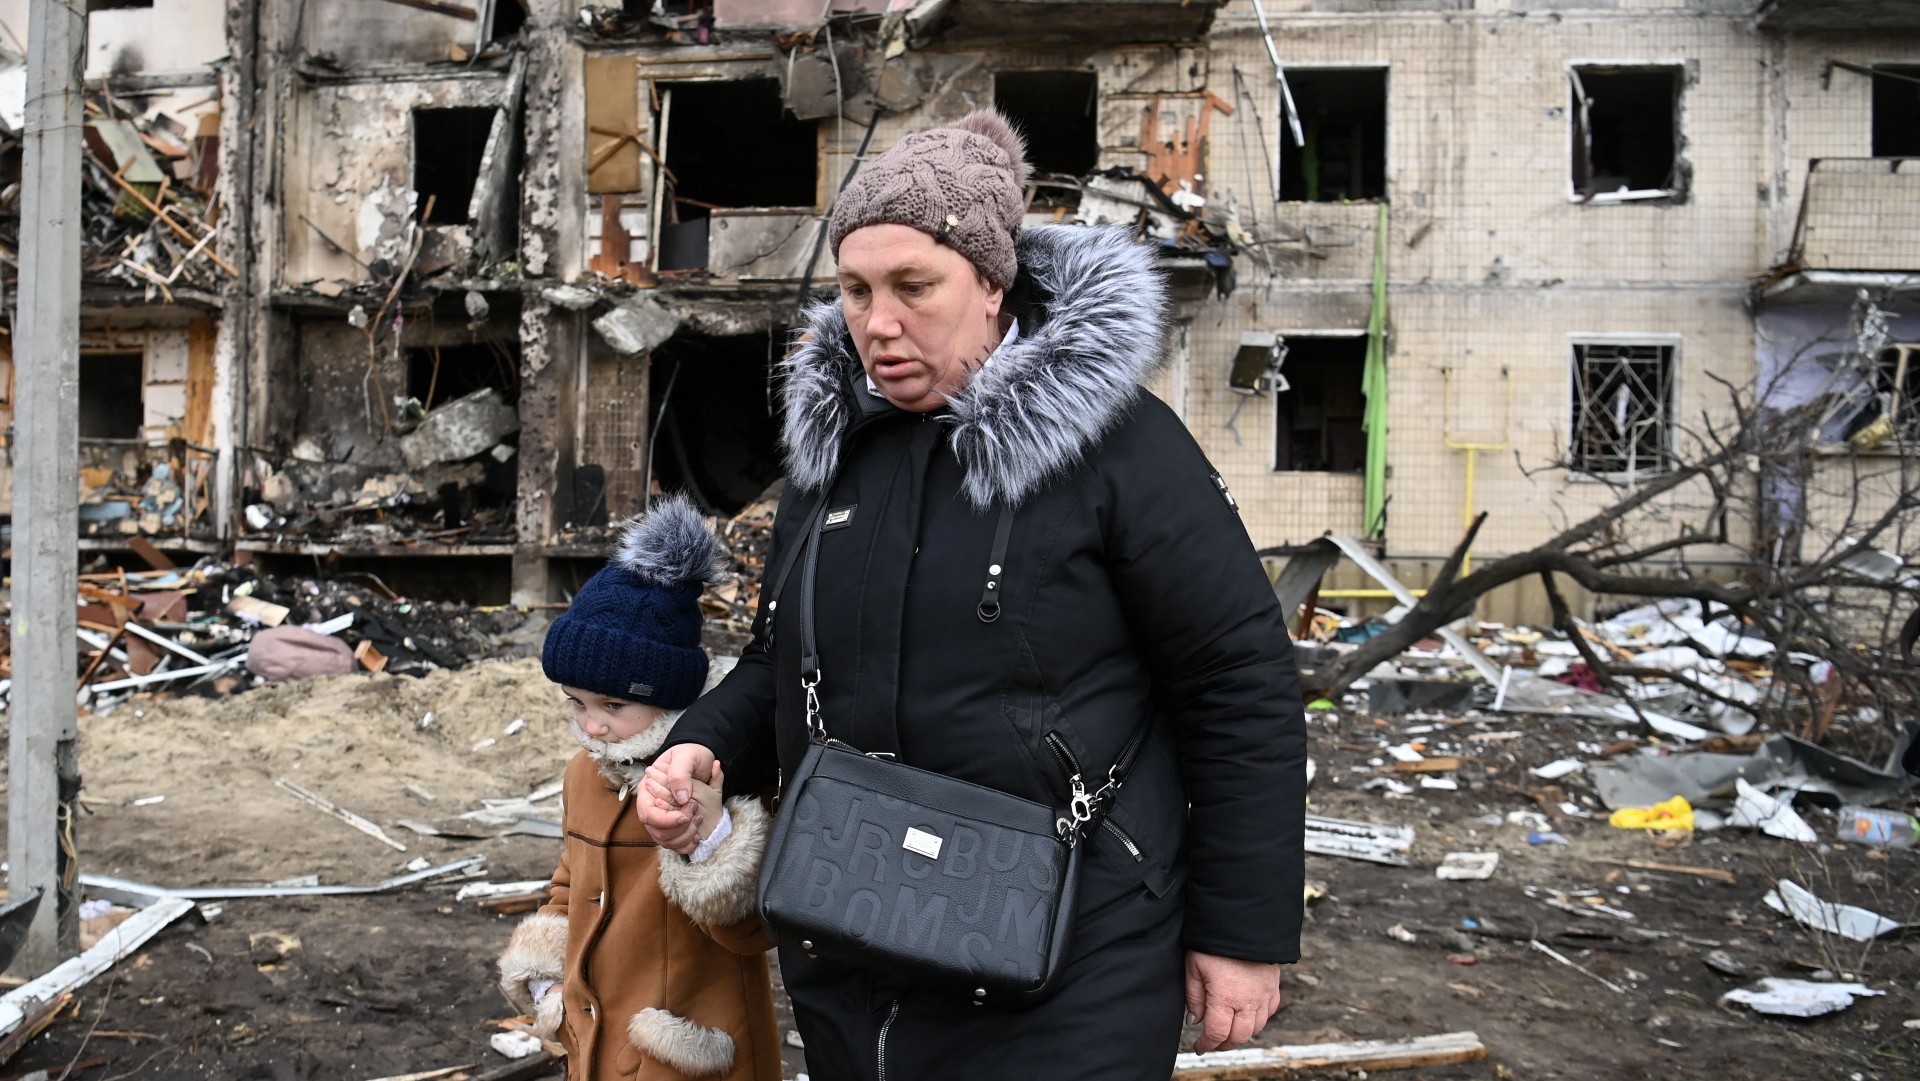 A woman and child outside a damaged residential building in Kyiv